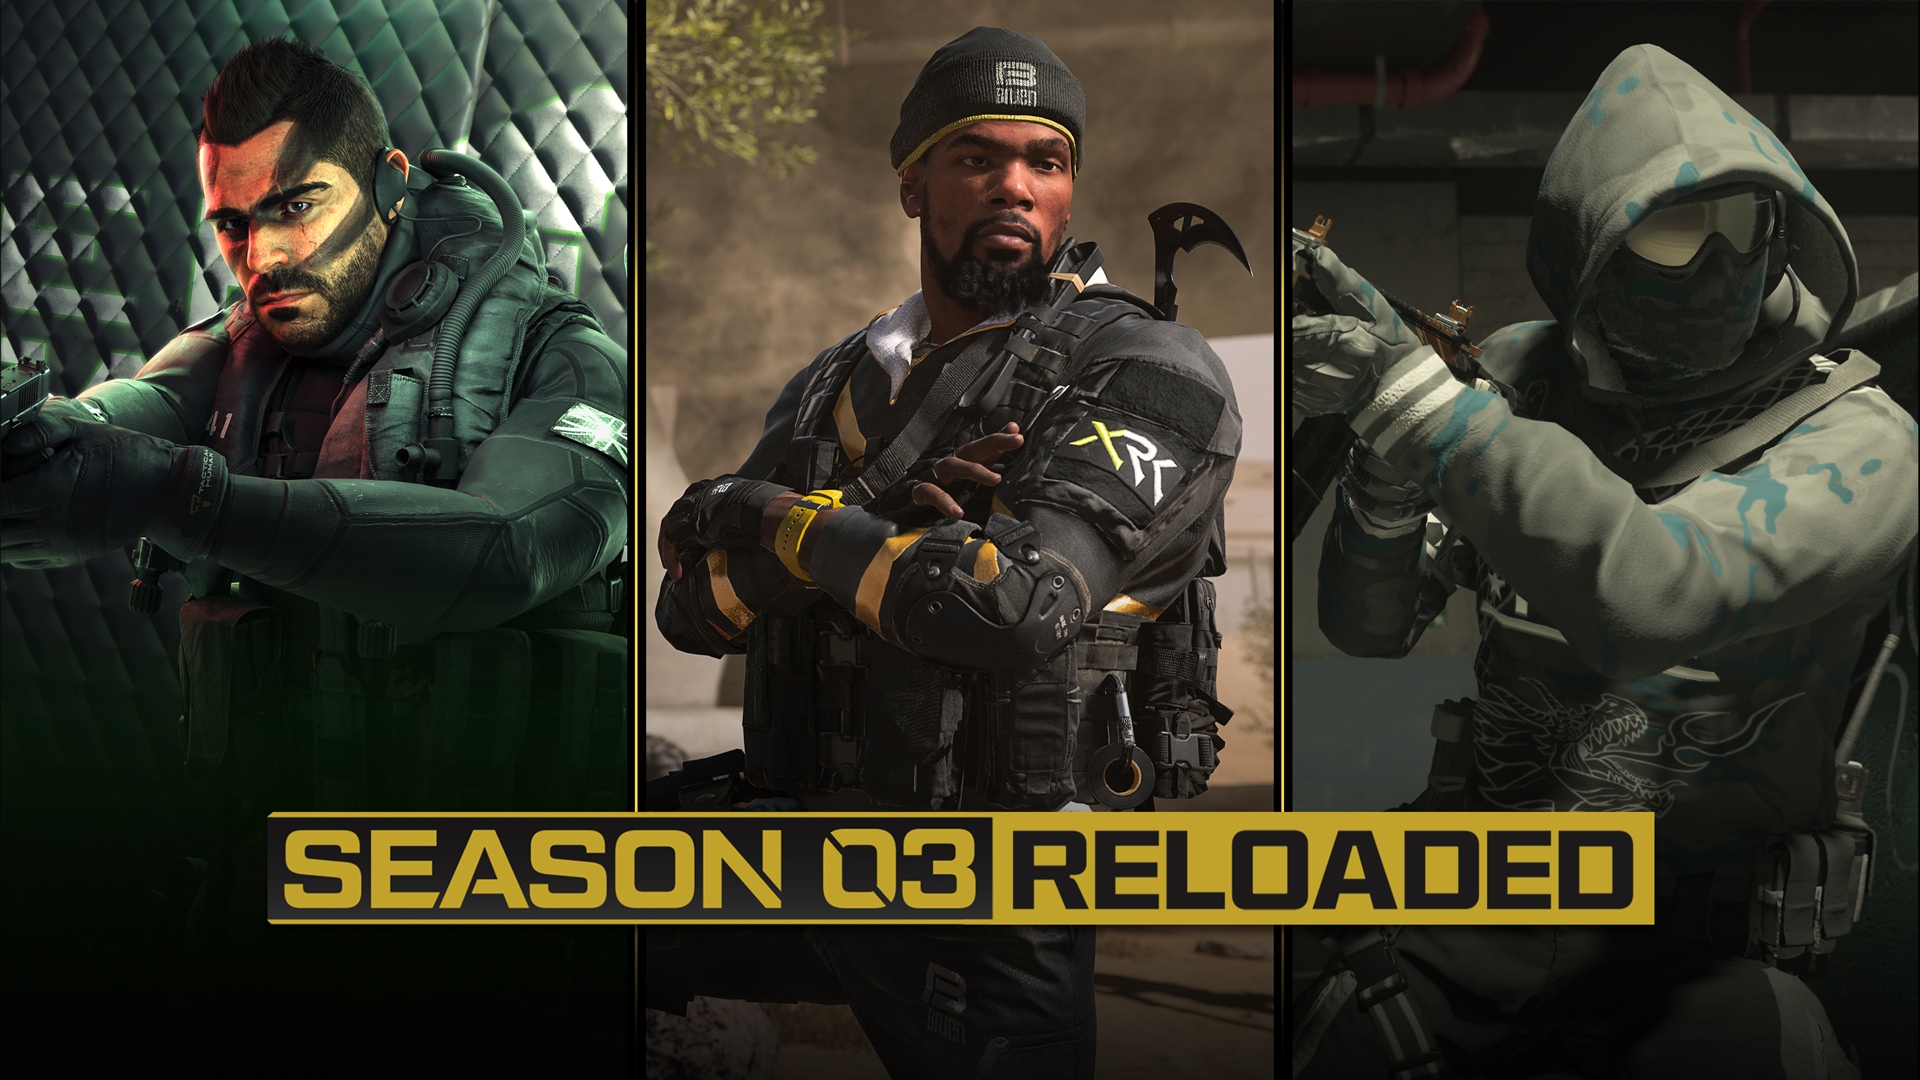 Your first look at Season 03 Reloaded: New map, new weapons, DMZ updates, and more